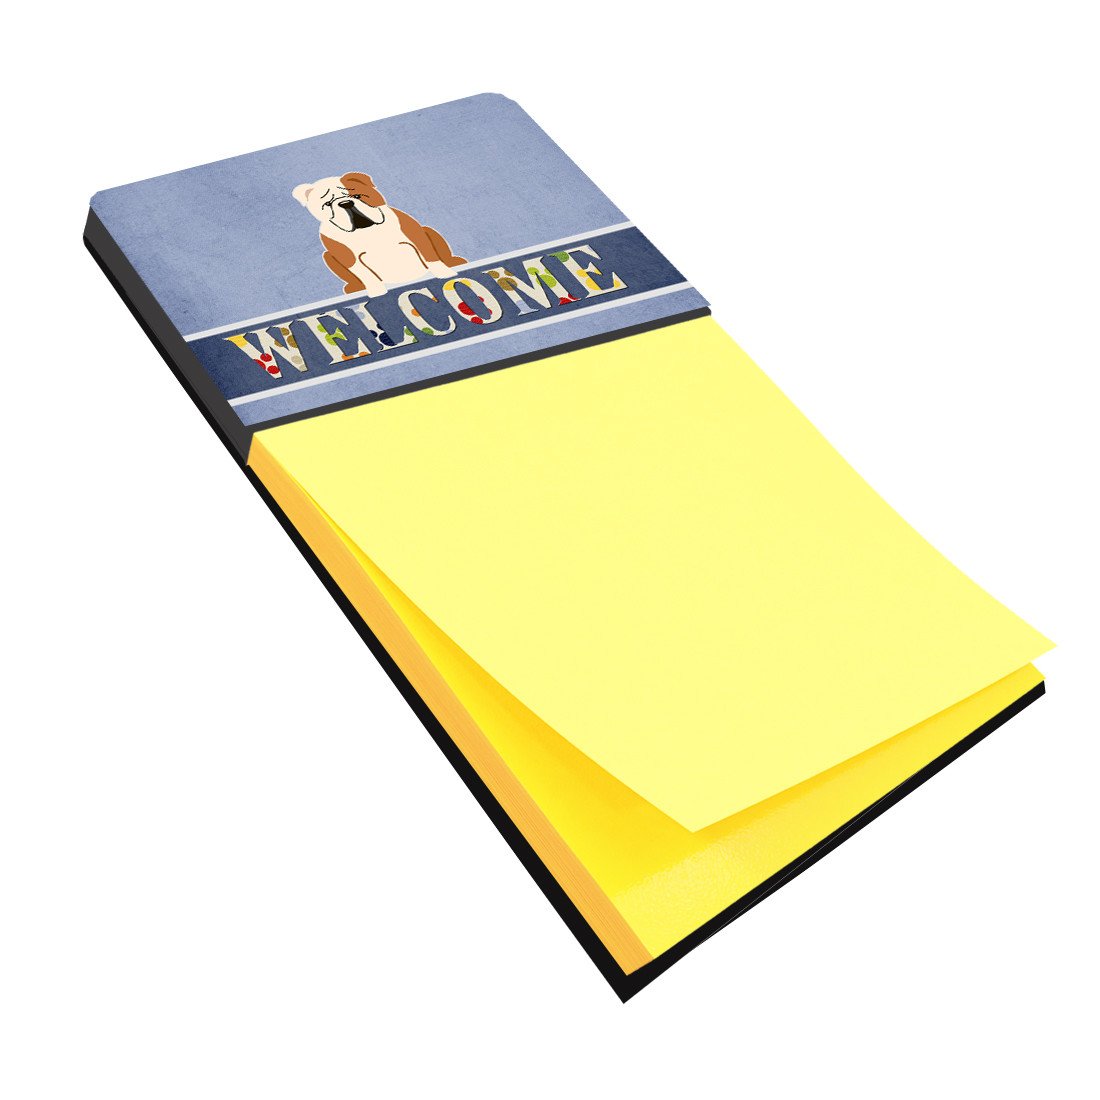 English Bulldog Fawn White Welcome Sticky Note Holder BB5706SN by Caroline's Treasures